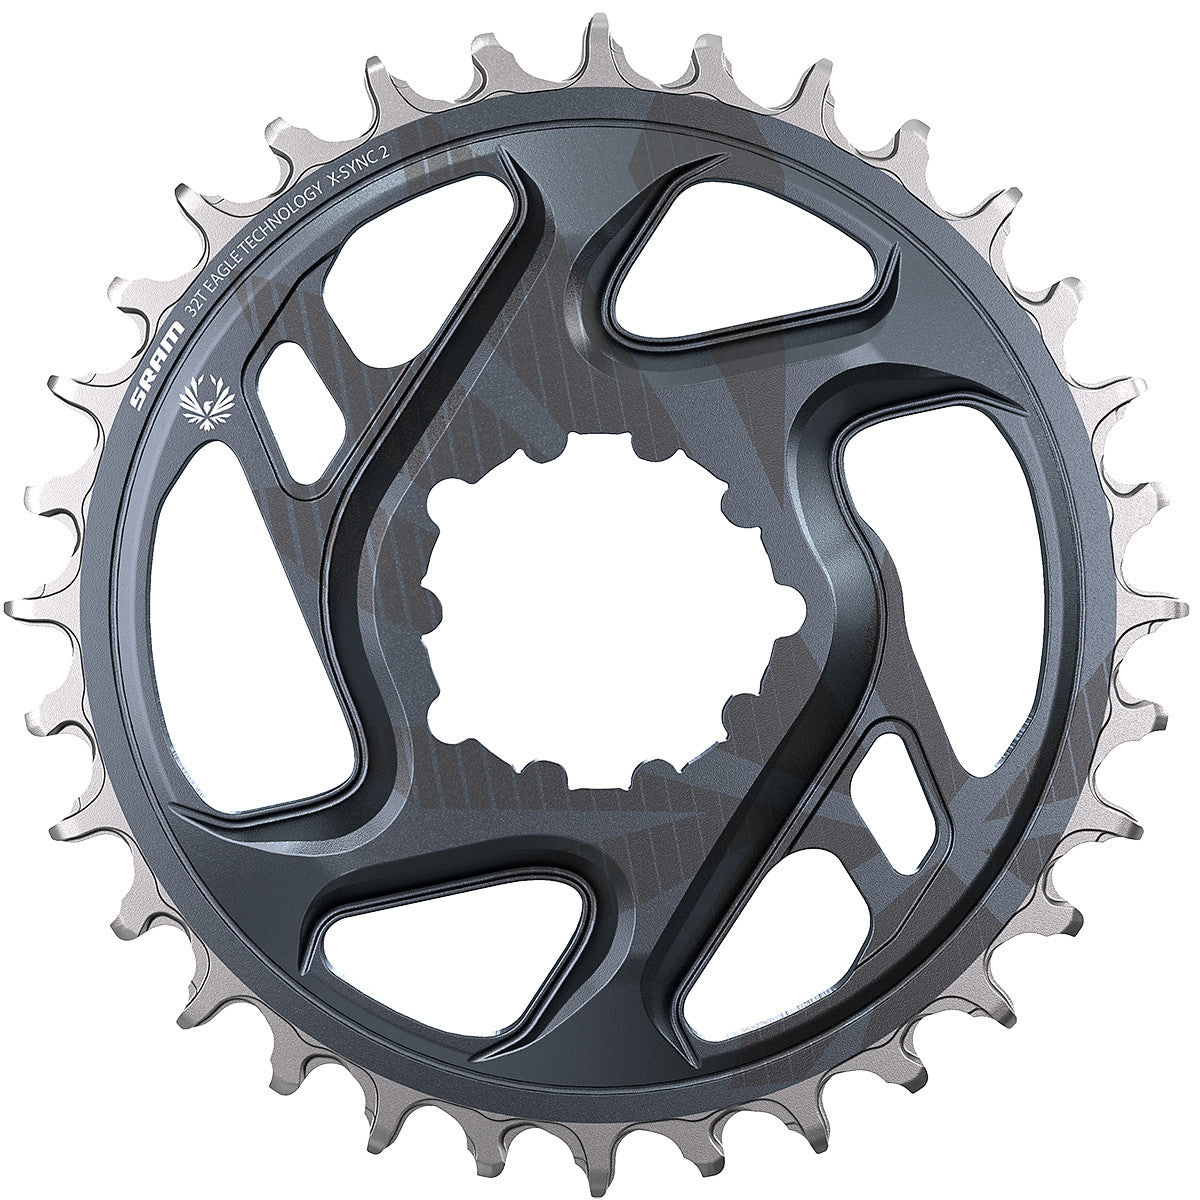 X-SYNC 2 Direct Mount Cold Forged Chainring